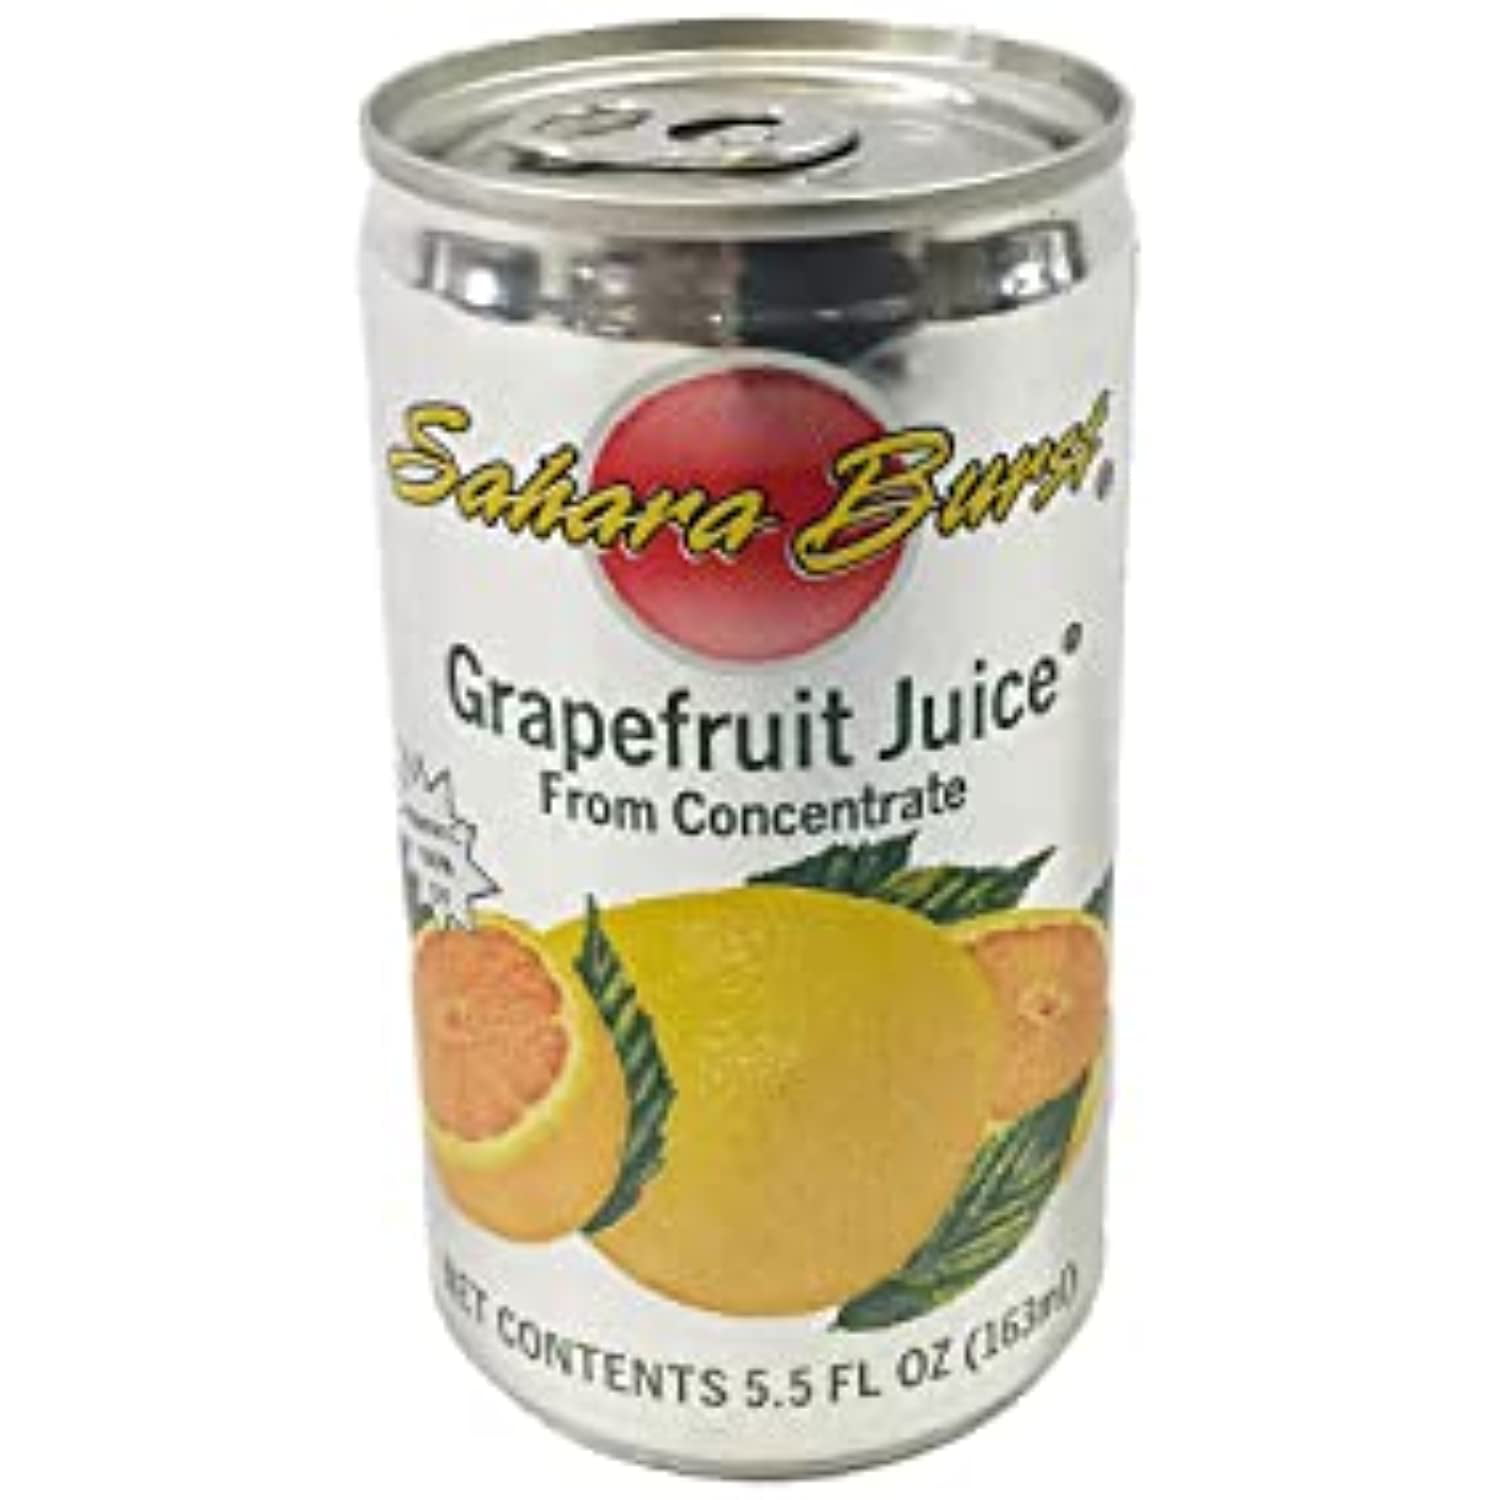 Sahara Burst Grapefruit Juice 100% From Concentrate - Unsweet Can